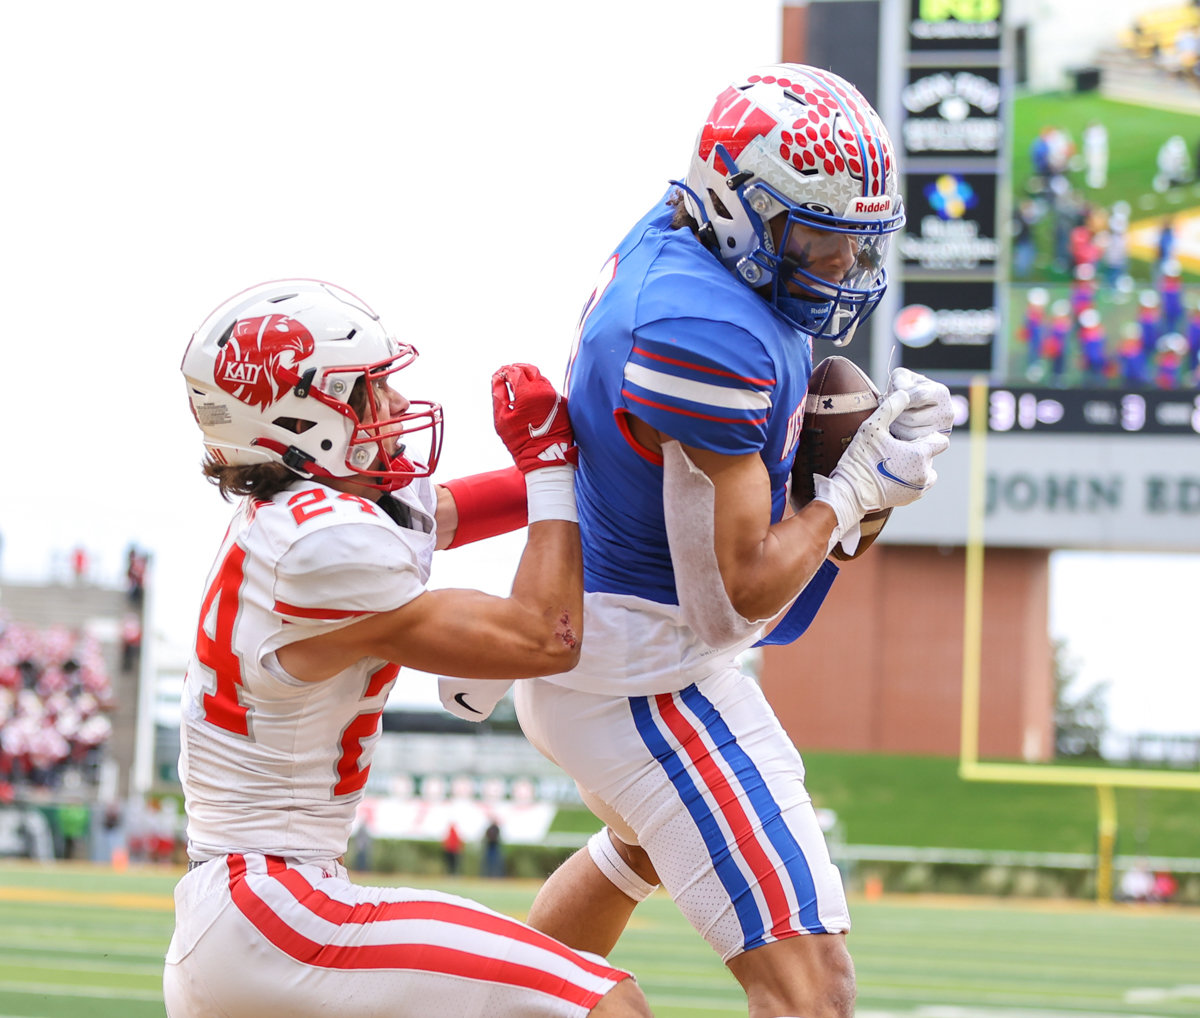 Westlake Chaparrals wide receiver Jaden Greathouse (9) brings in a touchdown pass over Katy Tigers defensive back Hamilton McMartin (24) during the Class 6A Division II state semifinal on December 11, 2021 in Waco, Texas.